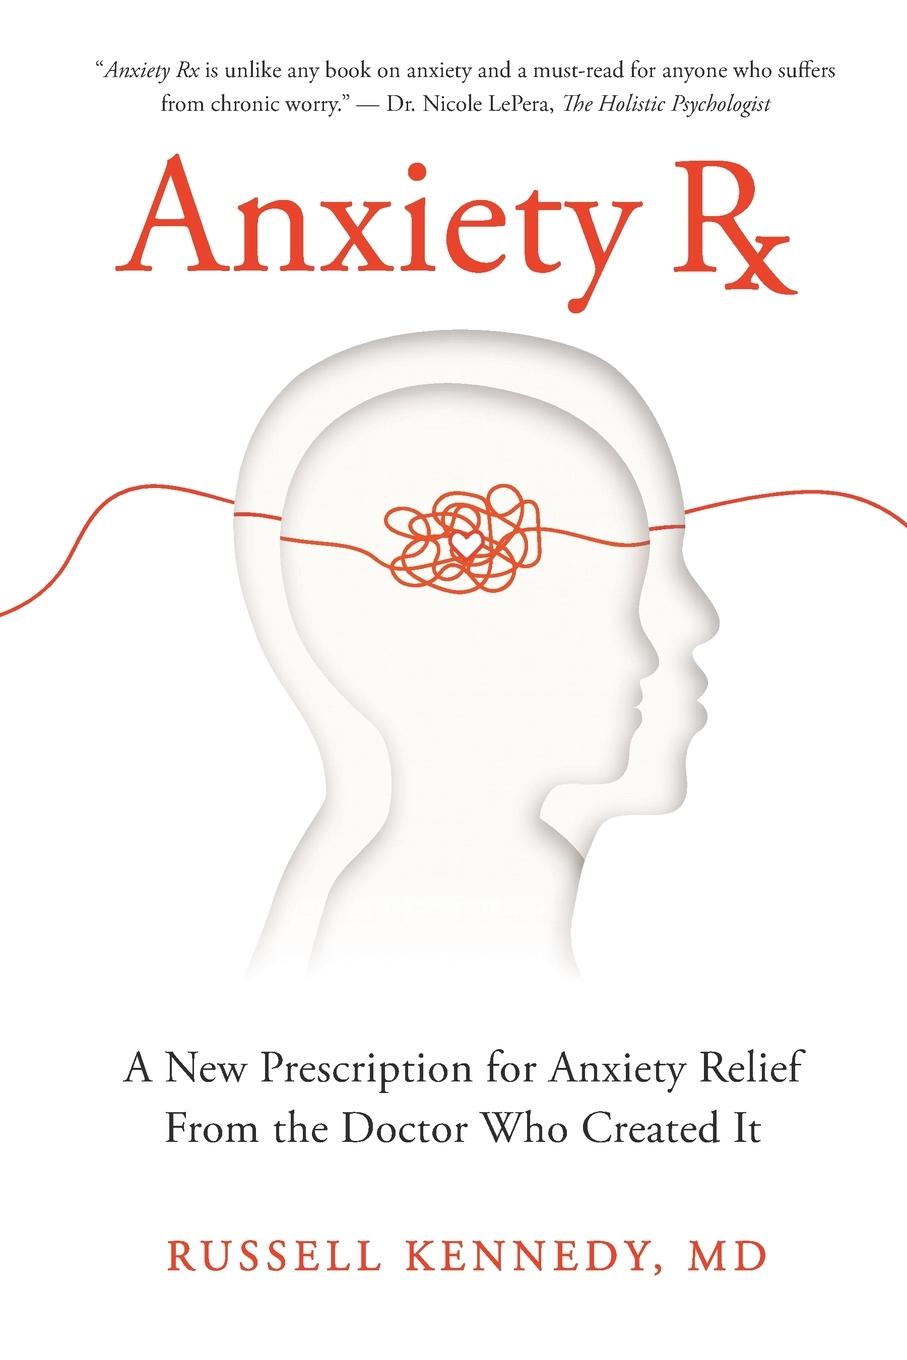 Book Anxiety Rx RUSSELL KENNEDY